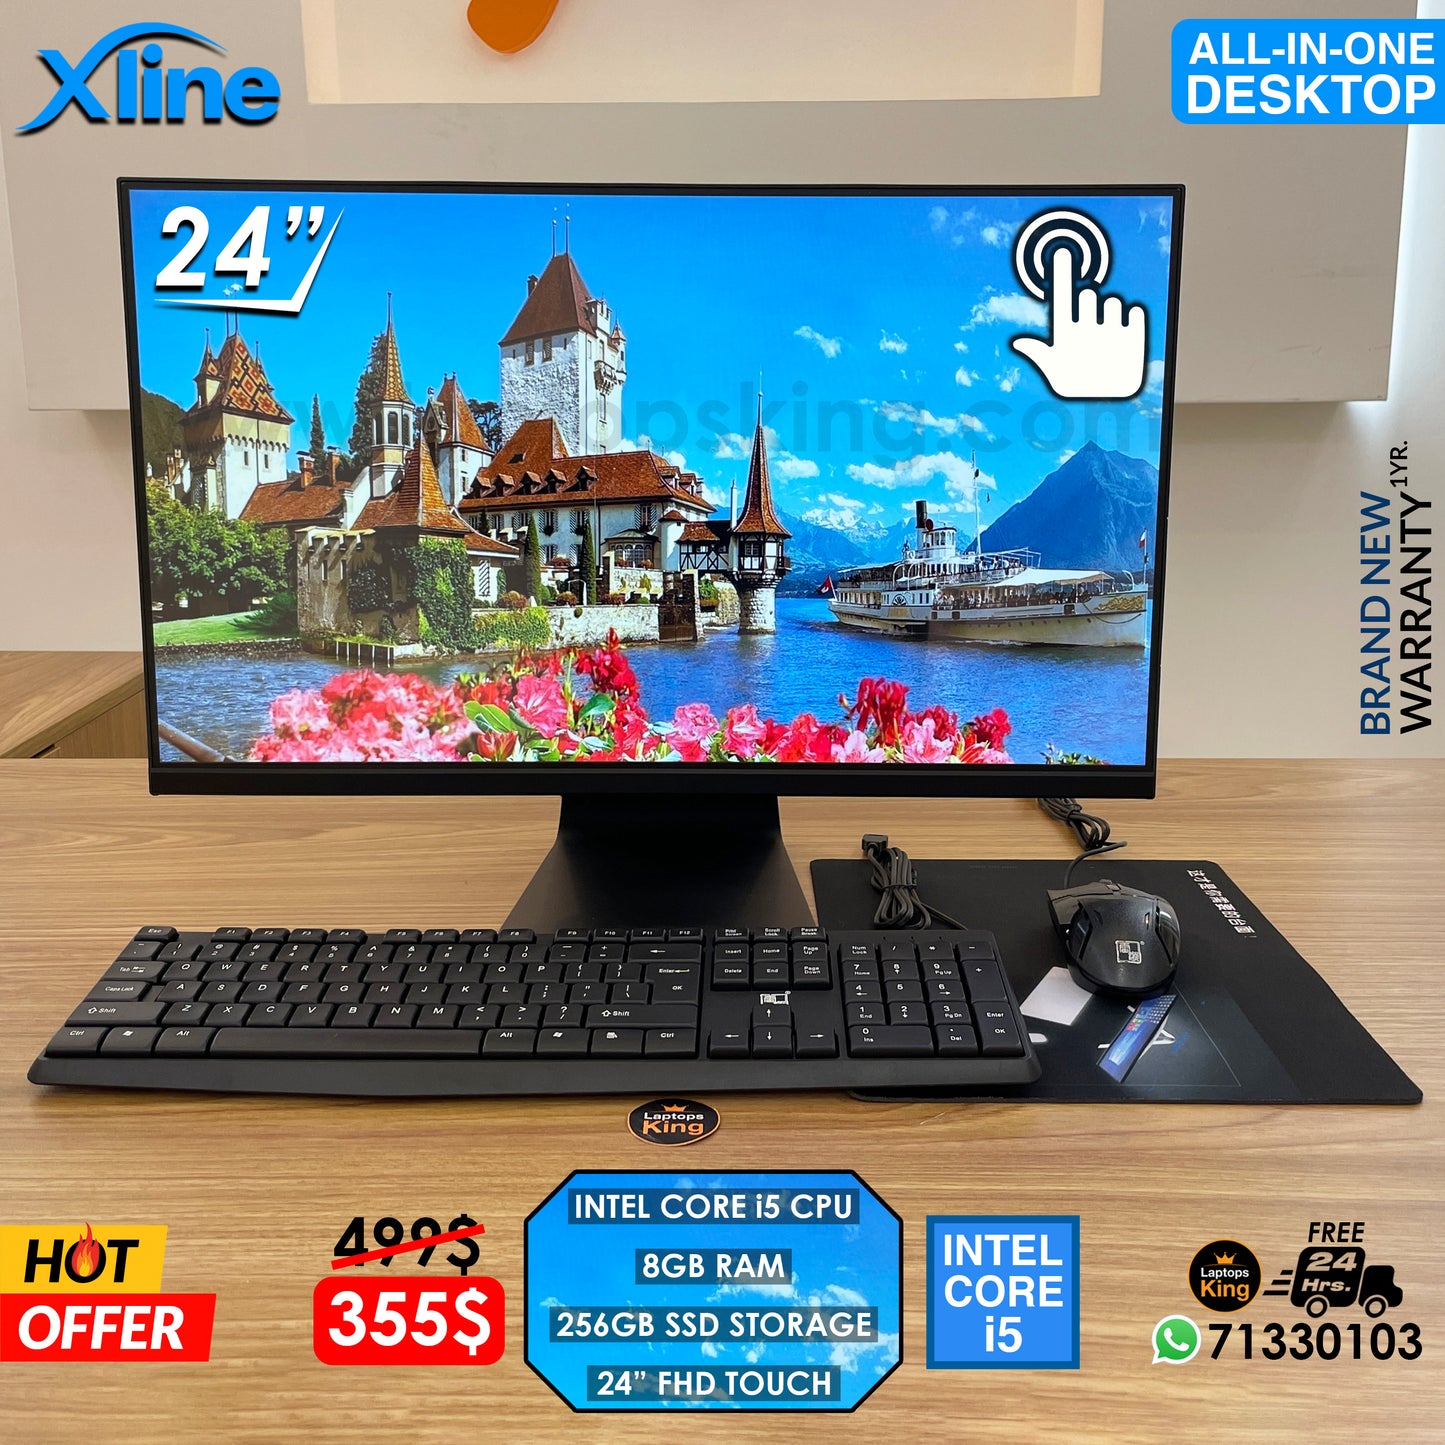 Xline 24" Core i5 Fhd Touch All-In-One Desktop Computer (Brand New)